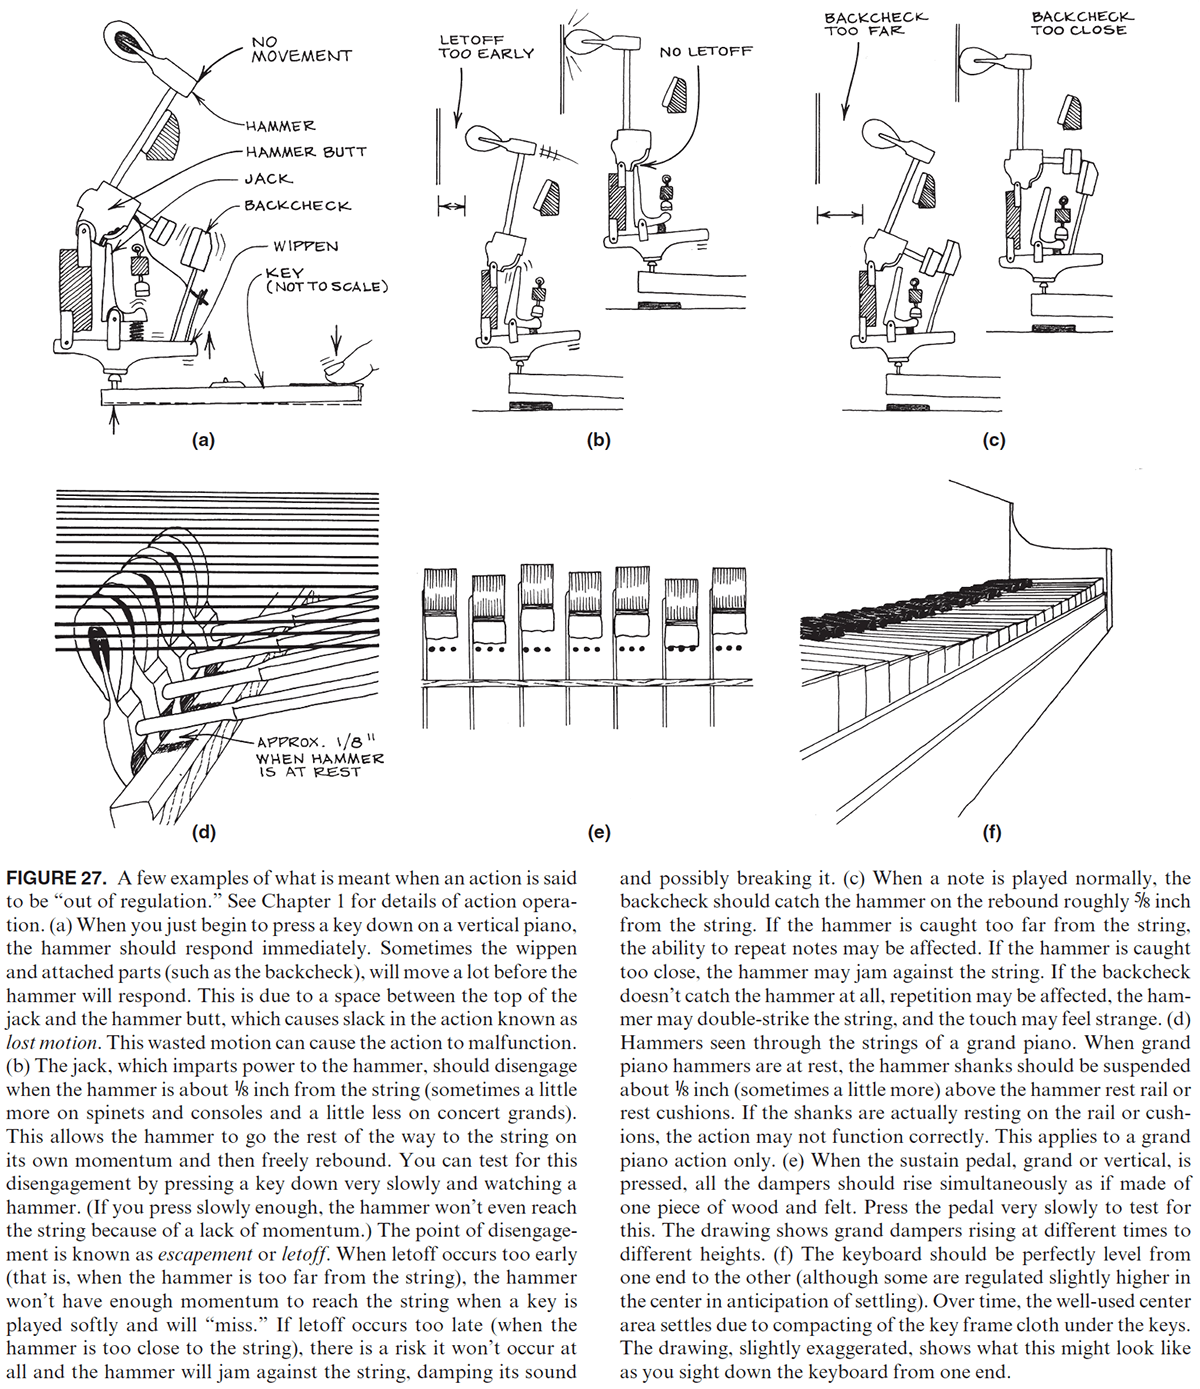 FIGURE 27. A few examples of what is meant when an action is said to be out of regulation. See Chapter 1 for details of action operation. (a) When you just begin to press a key down on a vertical piano, the hammer should respond immediately. Sometimes the wippen and attached parts (such as the backcheck), will move a lot before the hammer will respond. This is due to a space between the top of the jack and the hammer butt, which causes slack in the action known as lost motion. This wasted motion can cause the action to malfunction. (b) The jack, which imparts power to the hammer, should disengage when the hammer is about ⅛ inch from the string (sometimes a little more on spinets and consoles and a little less on concert grands). This allows the hammer to go the rest of the way to the string on its own momentum and then freely rebound. You can test for this disengagement by pressing a key down very slowly and watching a hammer. (If you press slowly enough, the hammer won't even reach the string because of a lack of momentum.) The point of disengagement is known as escapement or letoff. When letoff occurs too early (that is, when the hammer is too far from the string), the hammer won't have enough momentum to reach the string when a key is played softly and will miss. If letoff occurs too late (when the hammer is too close to the string), there is a risk it won't occur at all and the hammer will jam against the string, damping its sound and possibly breaking it. (c) When a note is played normally, the backcheck should catch the hammer on the rebound roughly ⅝ inch from the string. If the hammer is caught too far from the string, the ability to repeat notes may be affected. If the hammer is caught too close, the hammer may jam against the string. If the backcheck doesn't catch the hammer at all, repetition may be affected, the hammer may double-strike the string, and the touch may feel strange. (d) Hammers seen through the strings of a grand piano. When grand piano hammers are at rest, the hammer shanks should be suspended about ⅛ inch (sometimes a little more) above the hammer rest rail or rest cushions. If the shanks are actually resting on the rail or cushions, the action may not function correctly. This applies to a grand piano action only. (e) When the sustain pedal, grand or vertical, is pressed, all the dampers should rise simultaneously as if made of one piece of wood and felt. Press the pedal very slowly to test for this. The drawing shows grand dampers rising at different times to different heights. (f) The keyboard should be perfectly level from one end to the other (although some are regulated slightly higher in the center in anticipation of settling). Over time, the well-used center area settles due to compacting of the key frame cloth under the keys. The drawing, slightly exaggerated, shows what this might look like as you sight down the keyboard from one end.